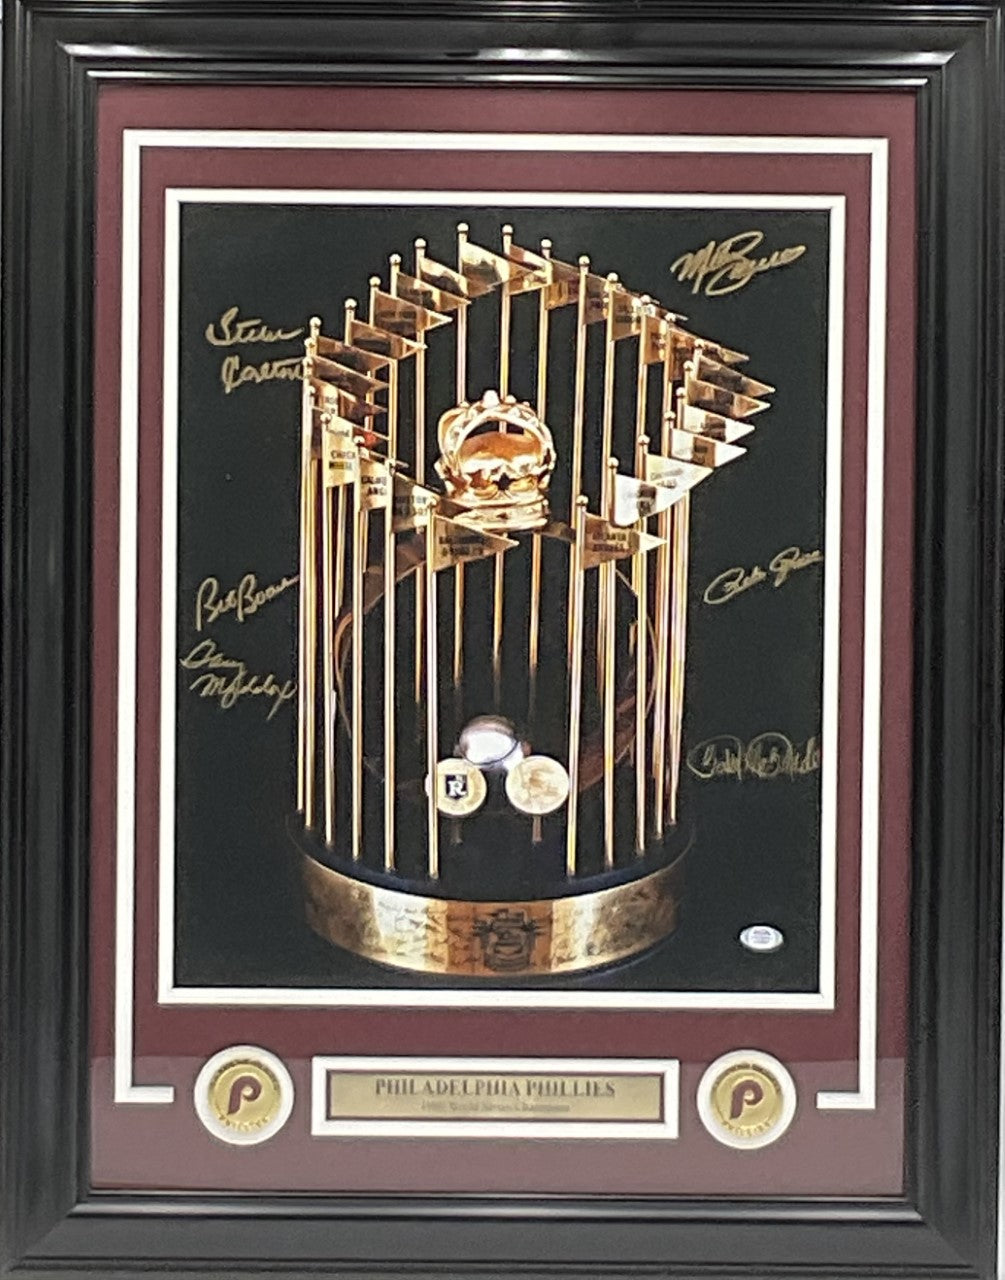 1980 World Series Champion Autographed Framed 16x20 Photo